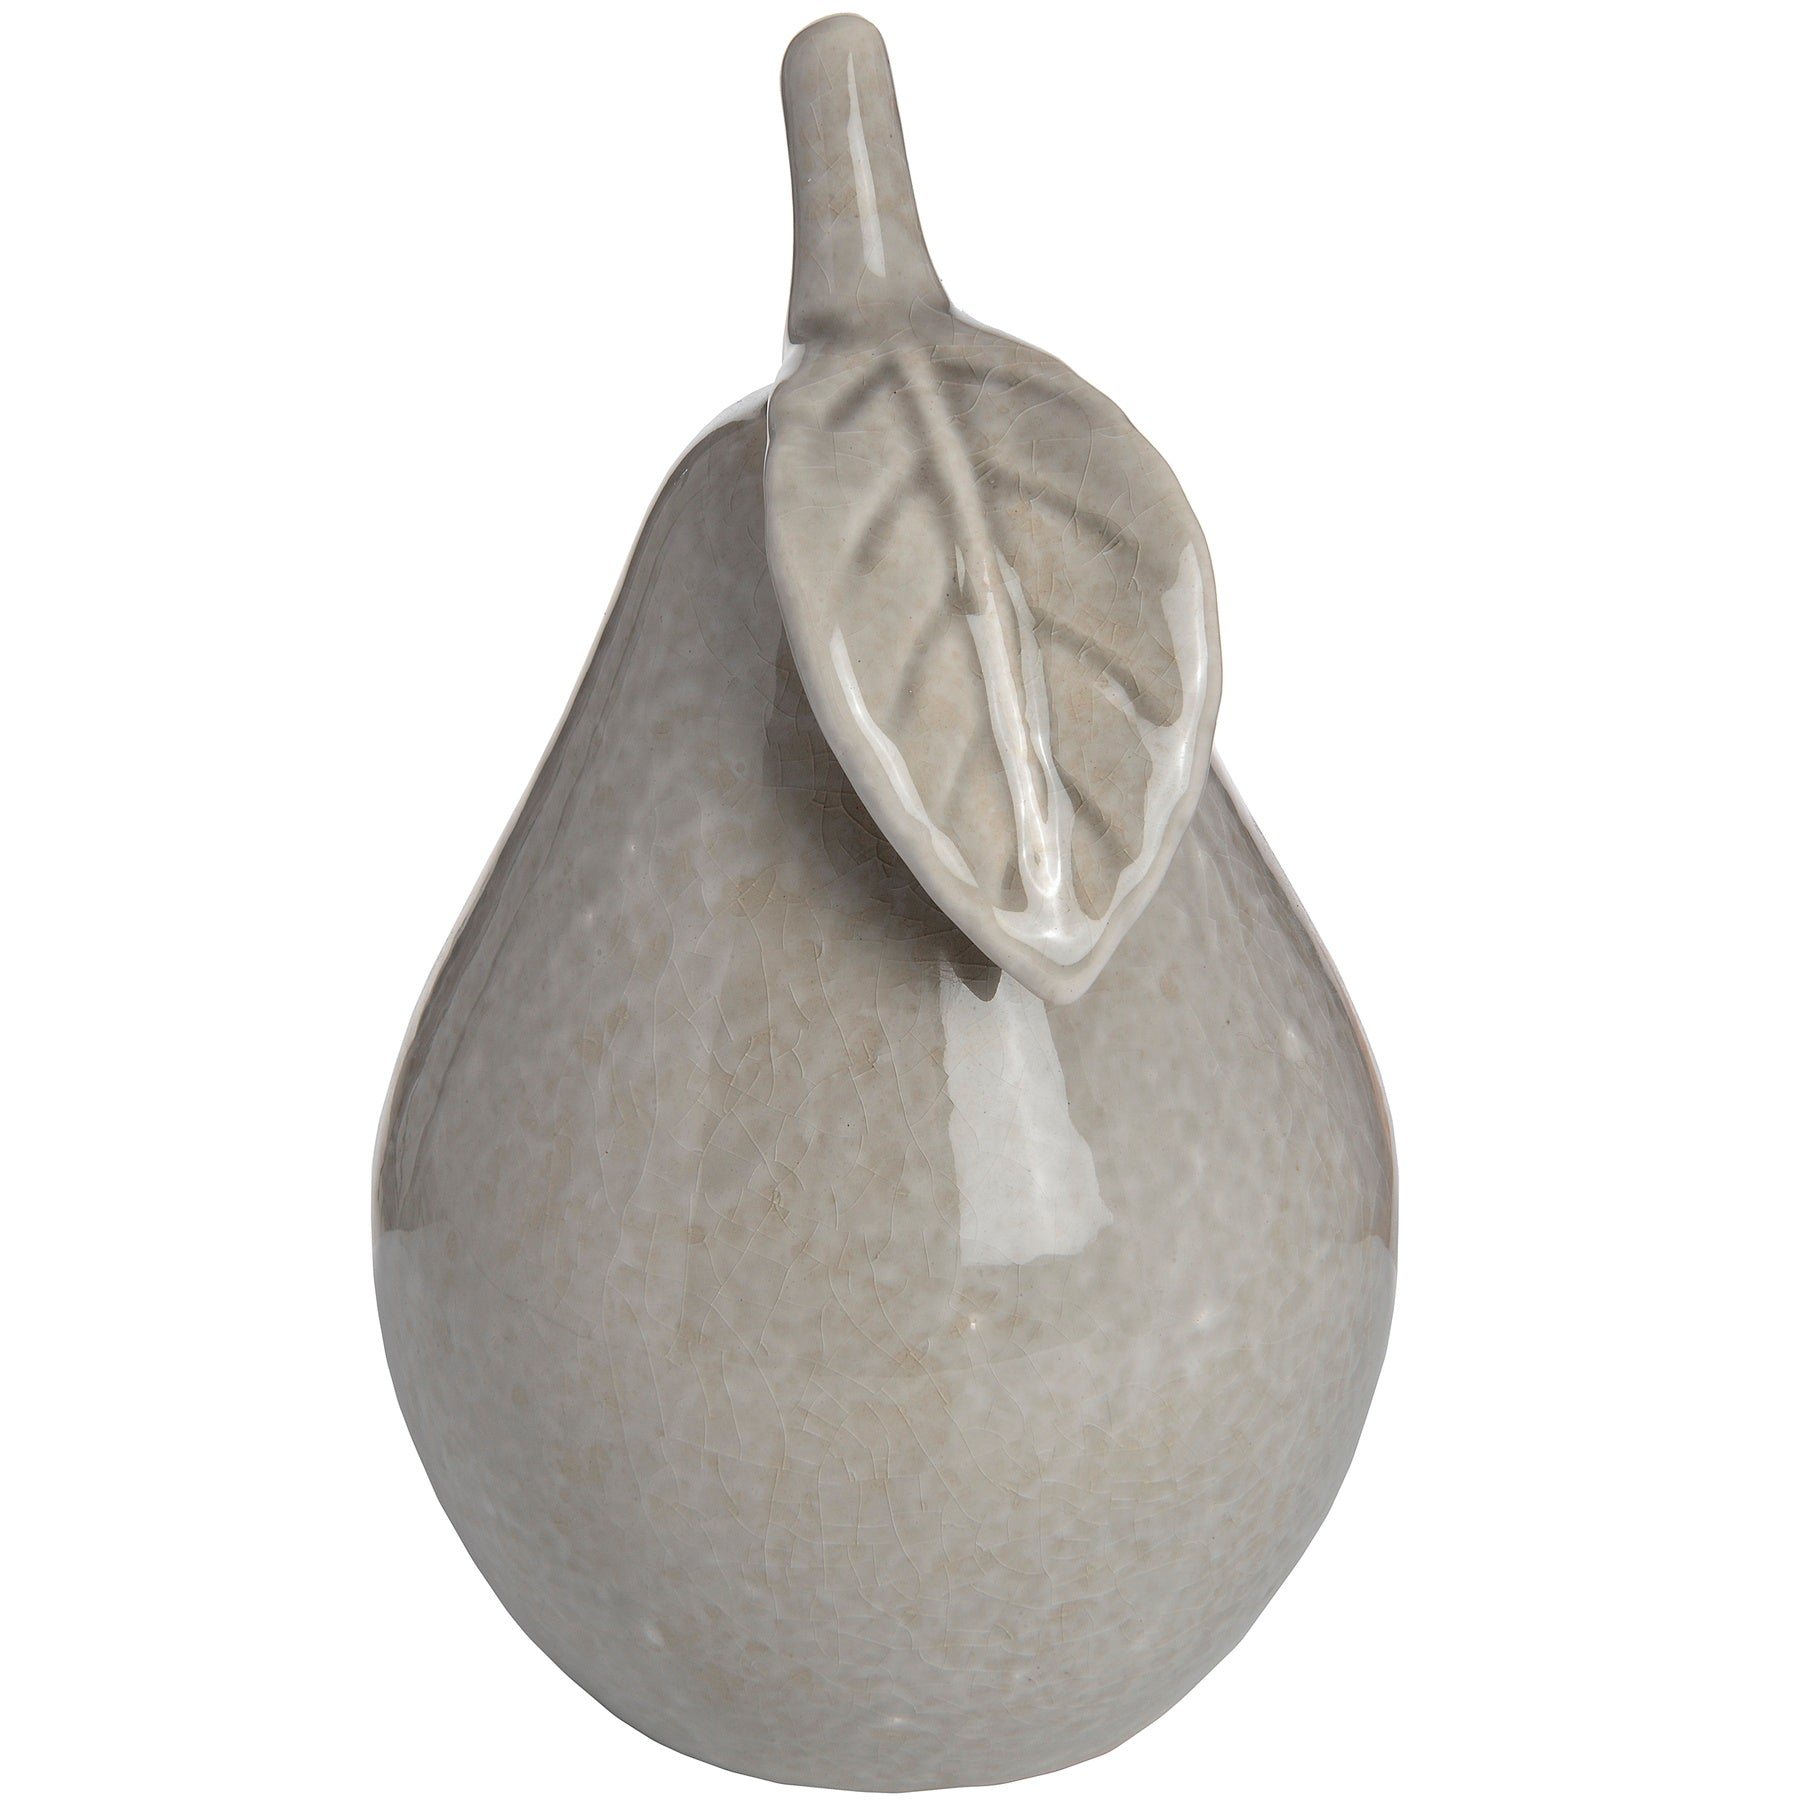 View Antique Grey Small Ceramic Pear information